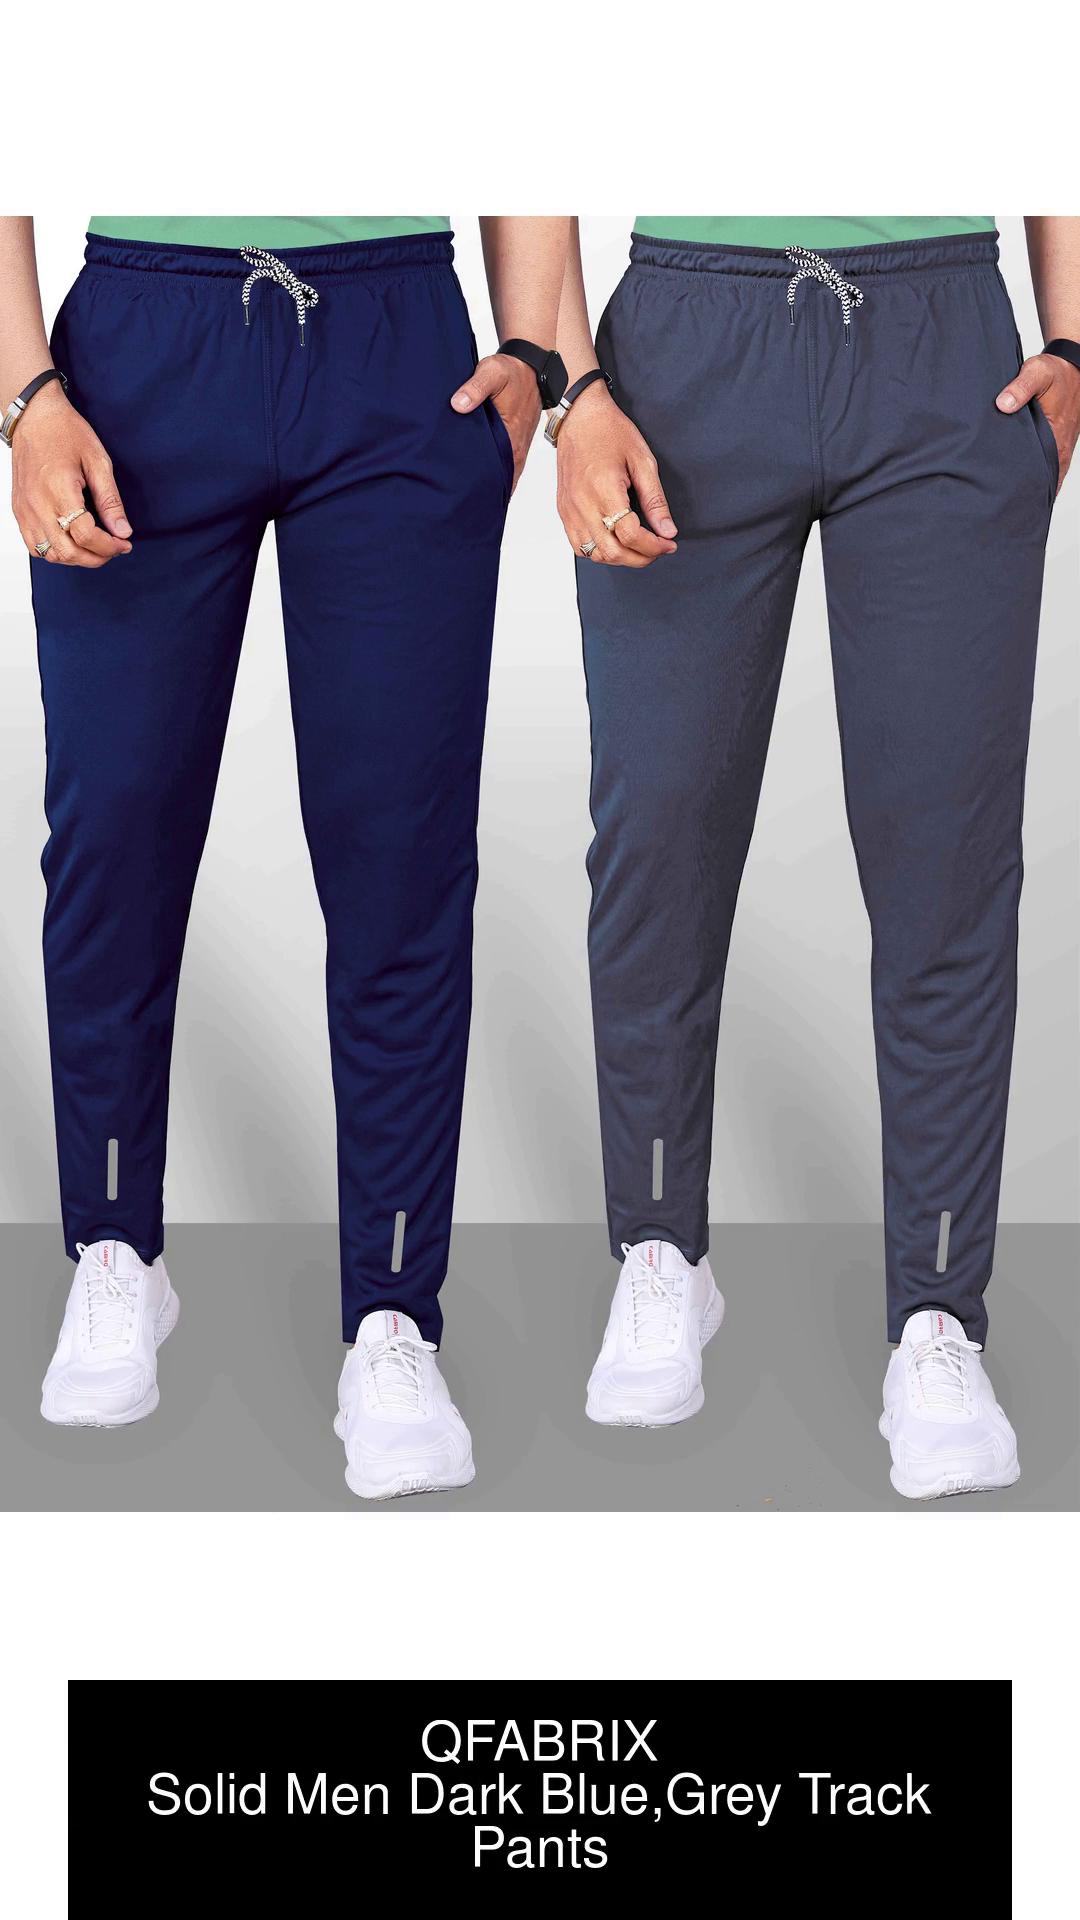 Men's Track Pants Vs Sweatpants: Which is the Better Option?, by kaladhara